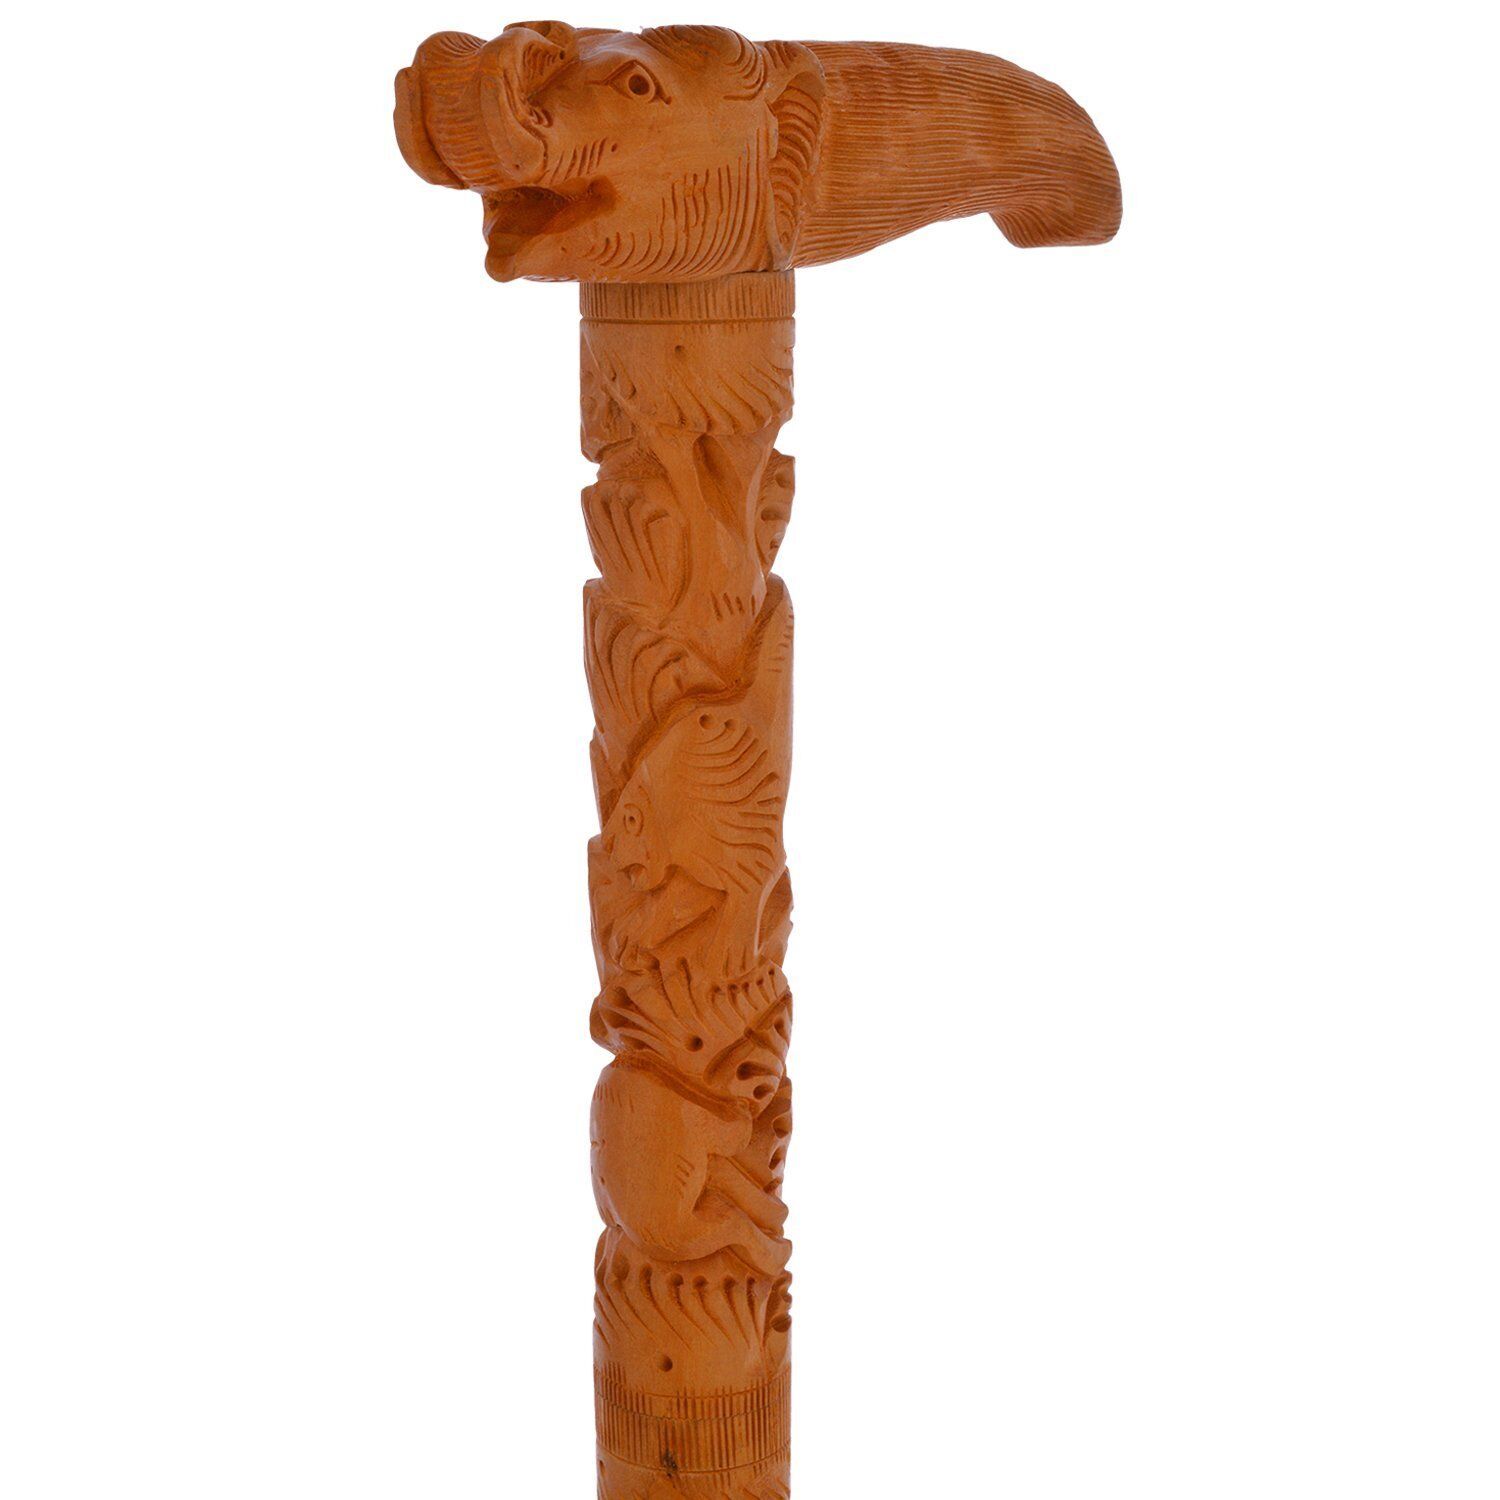 Walkers / Cane Wooden Walking Cane Hand Carved Stick Elephant Handle X\'mas Gift